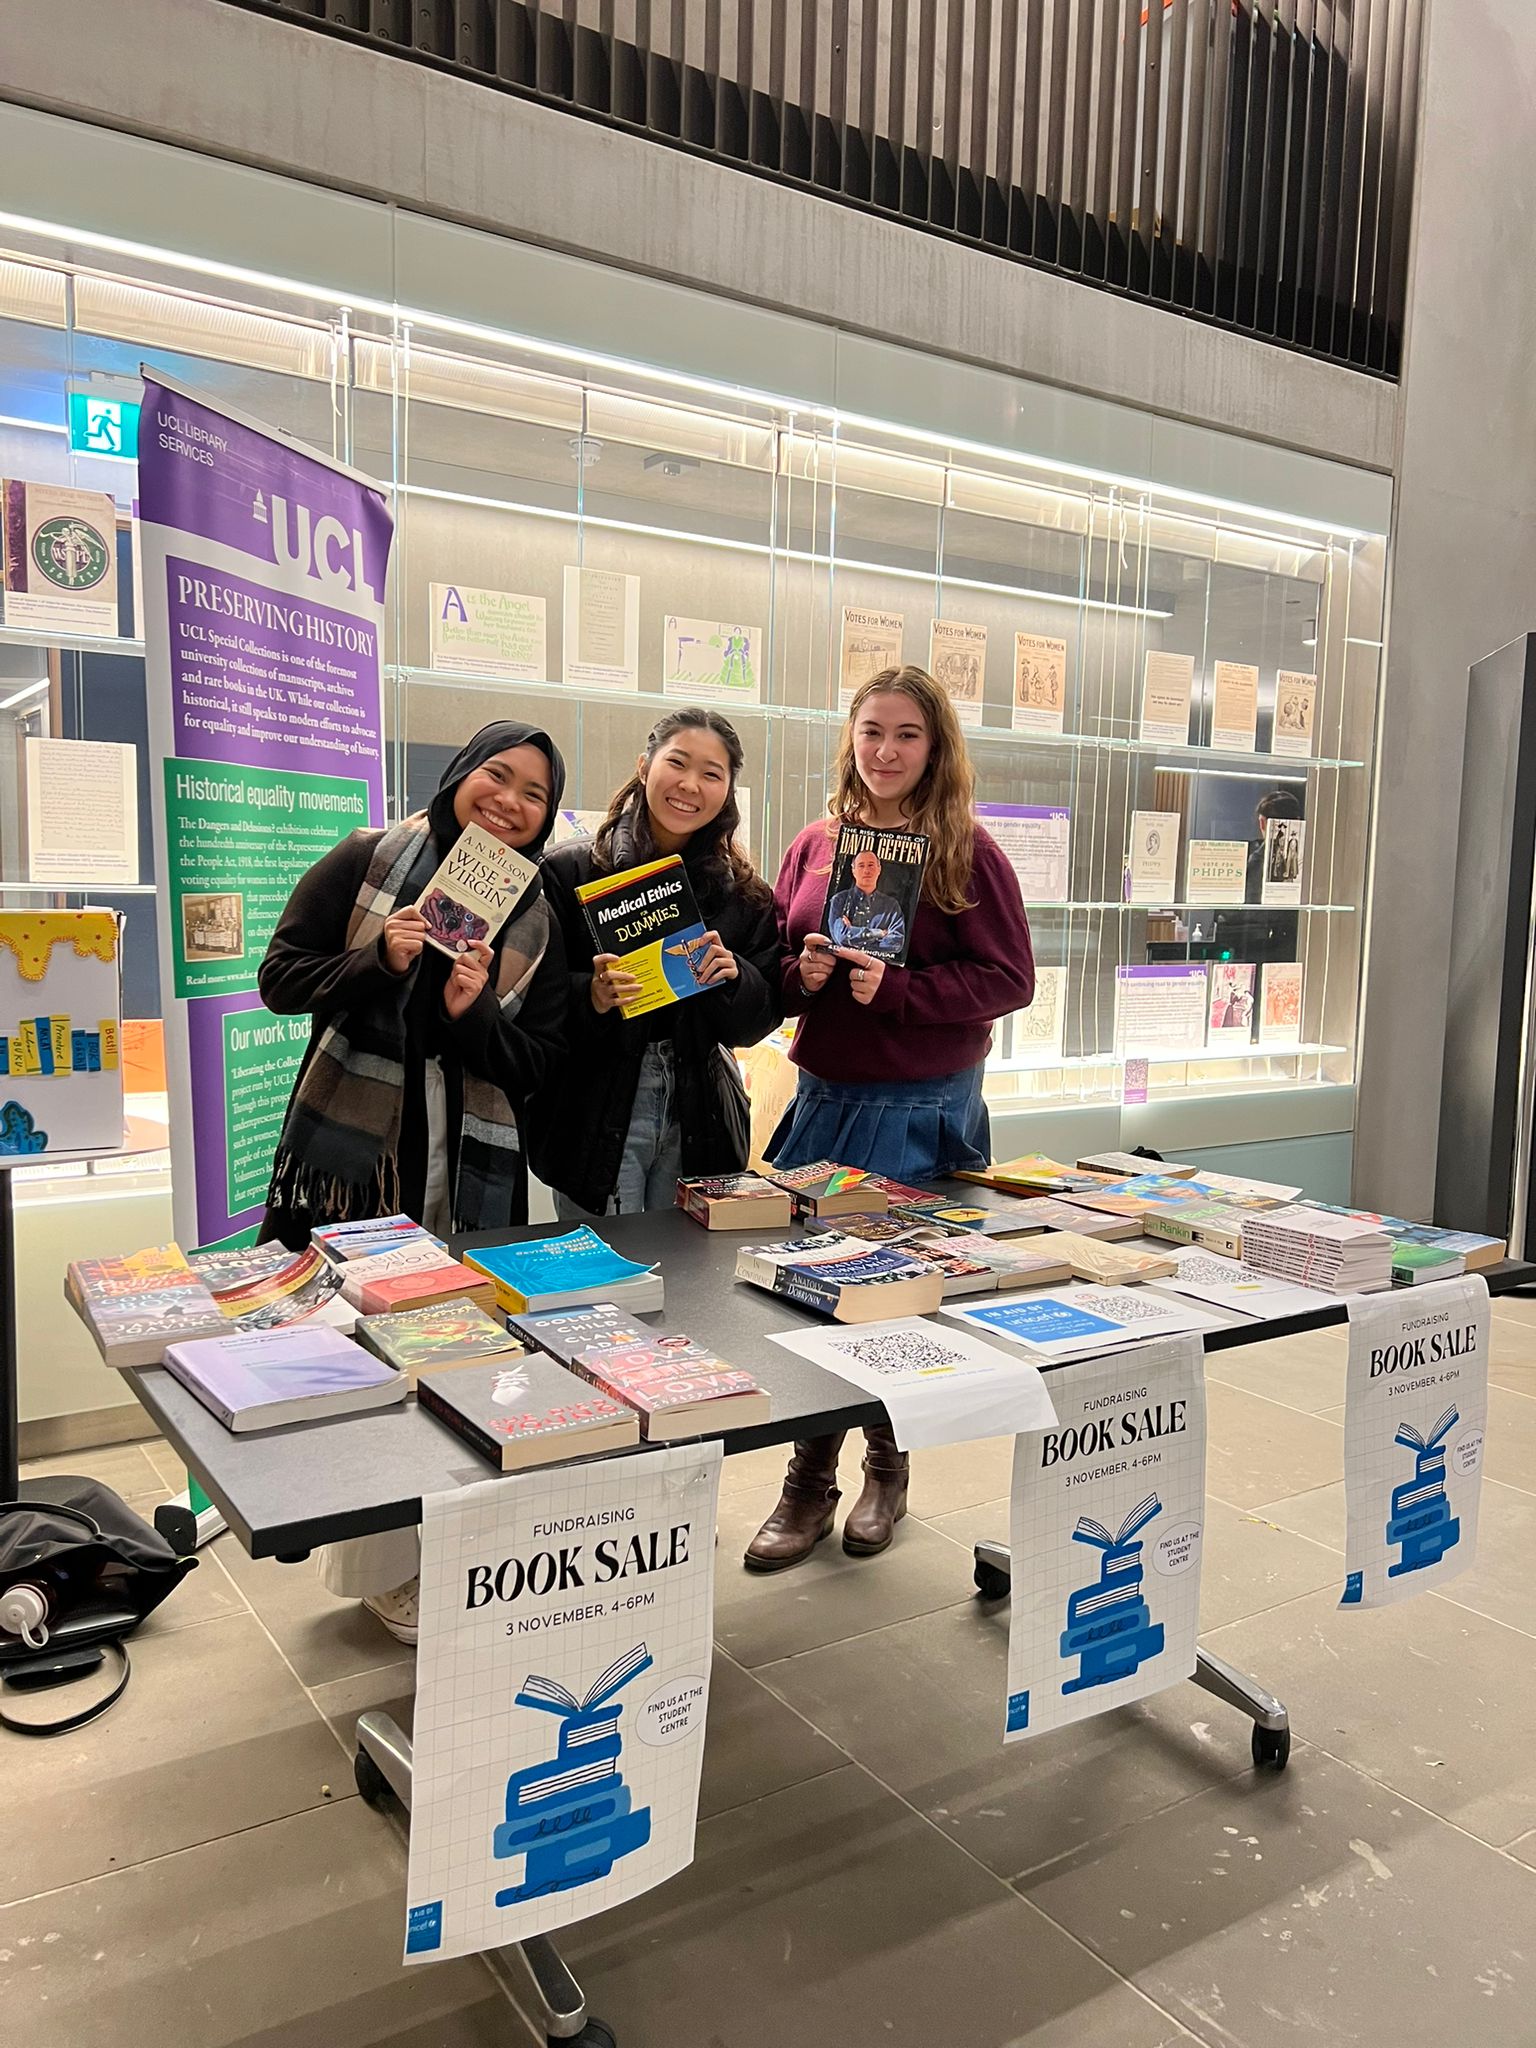 Volunteers at the book sale stand